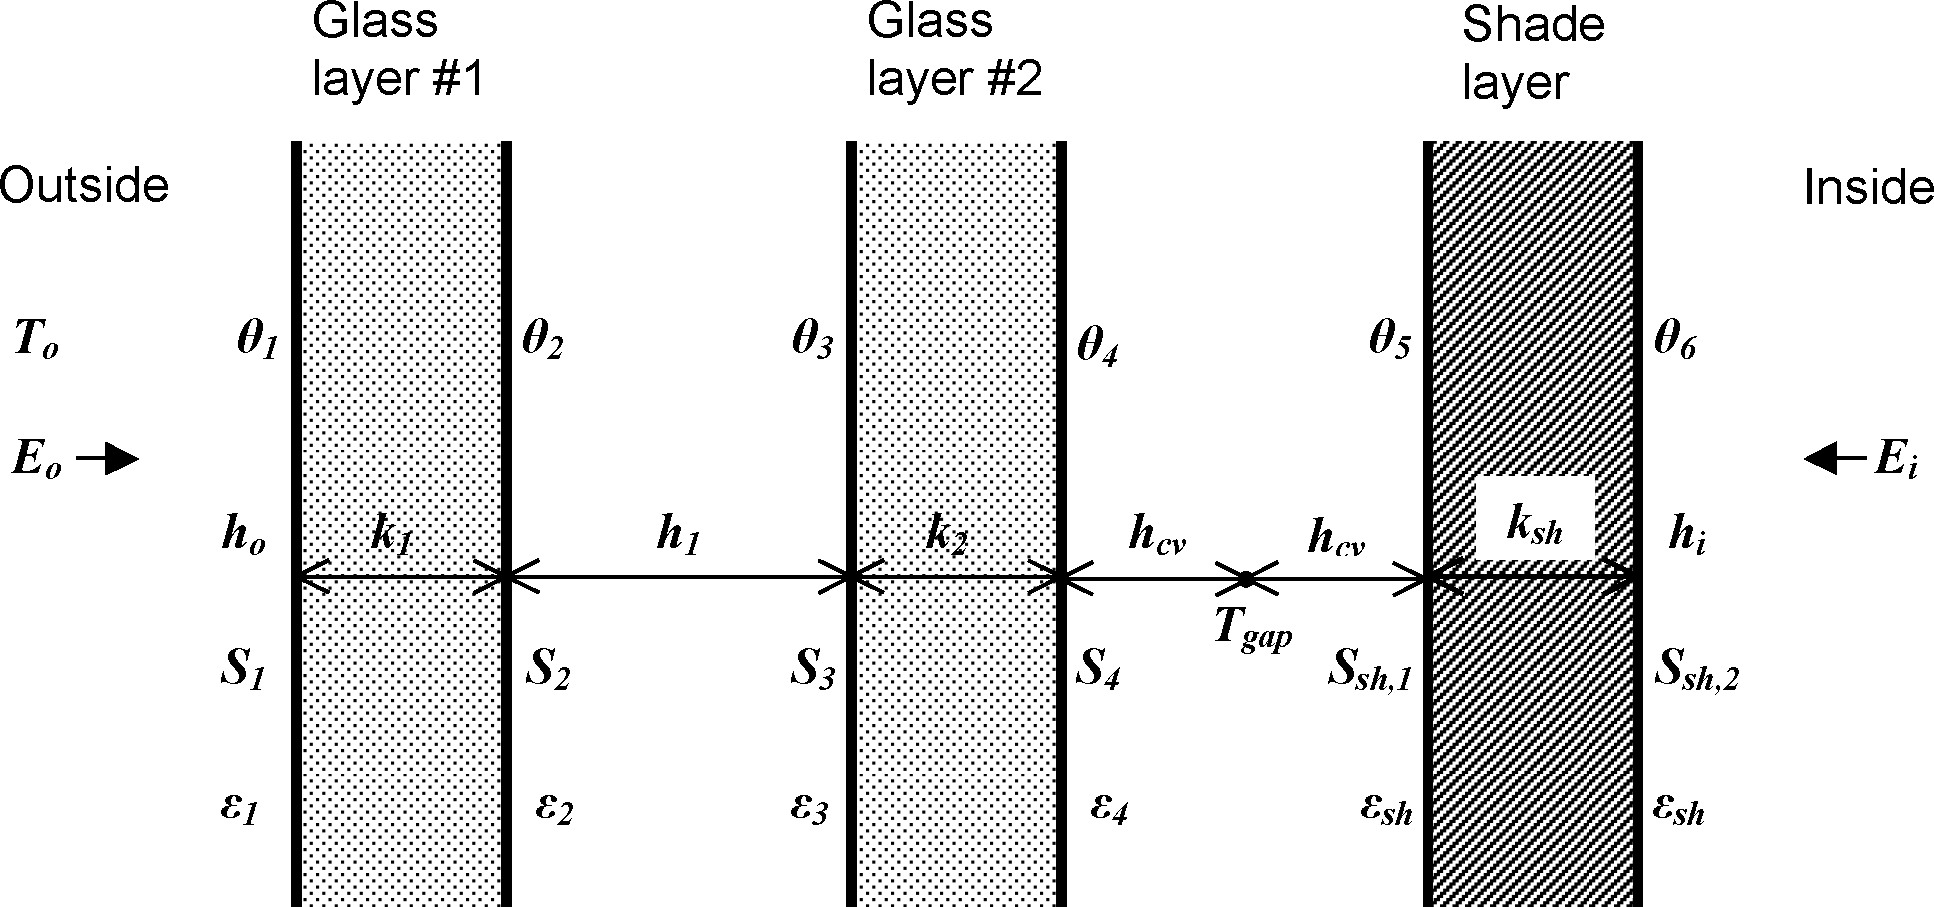 Glazing system with two glass layers and an interior shading layer showing variables used in heat balance equations. [fig:glazing-system-with-two-glass-layers-and-an]